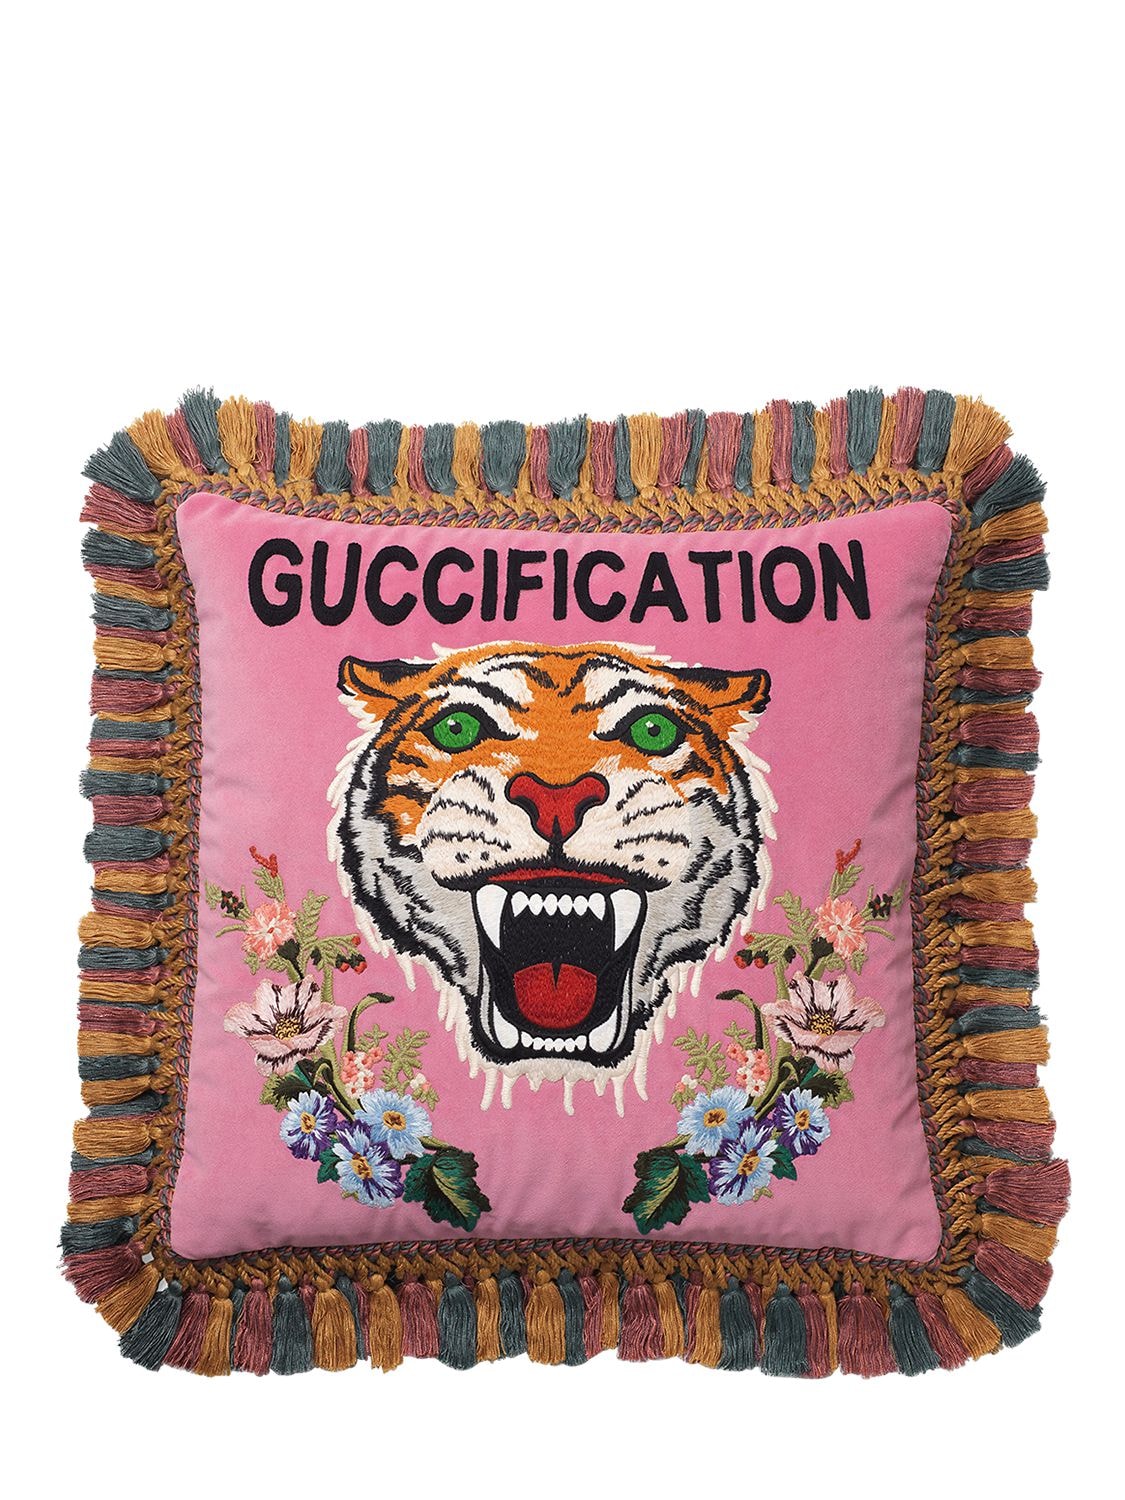 Guccification Cross Stitch クッション